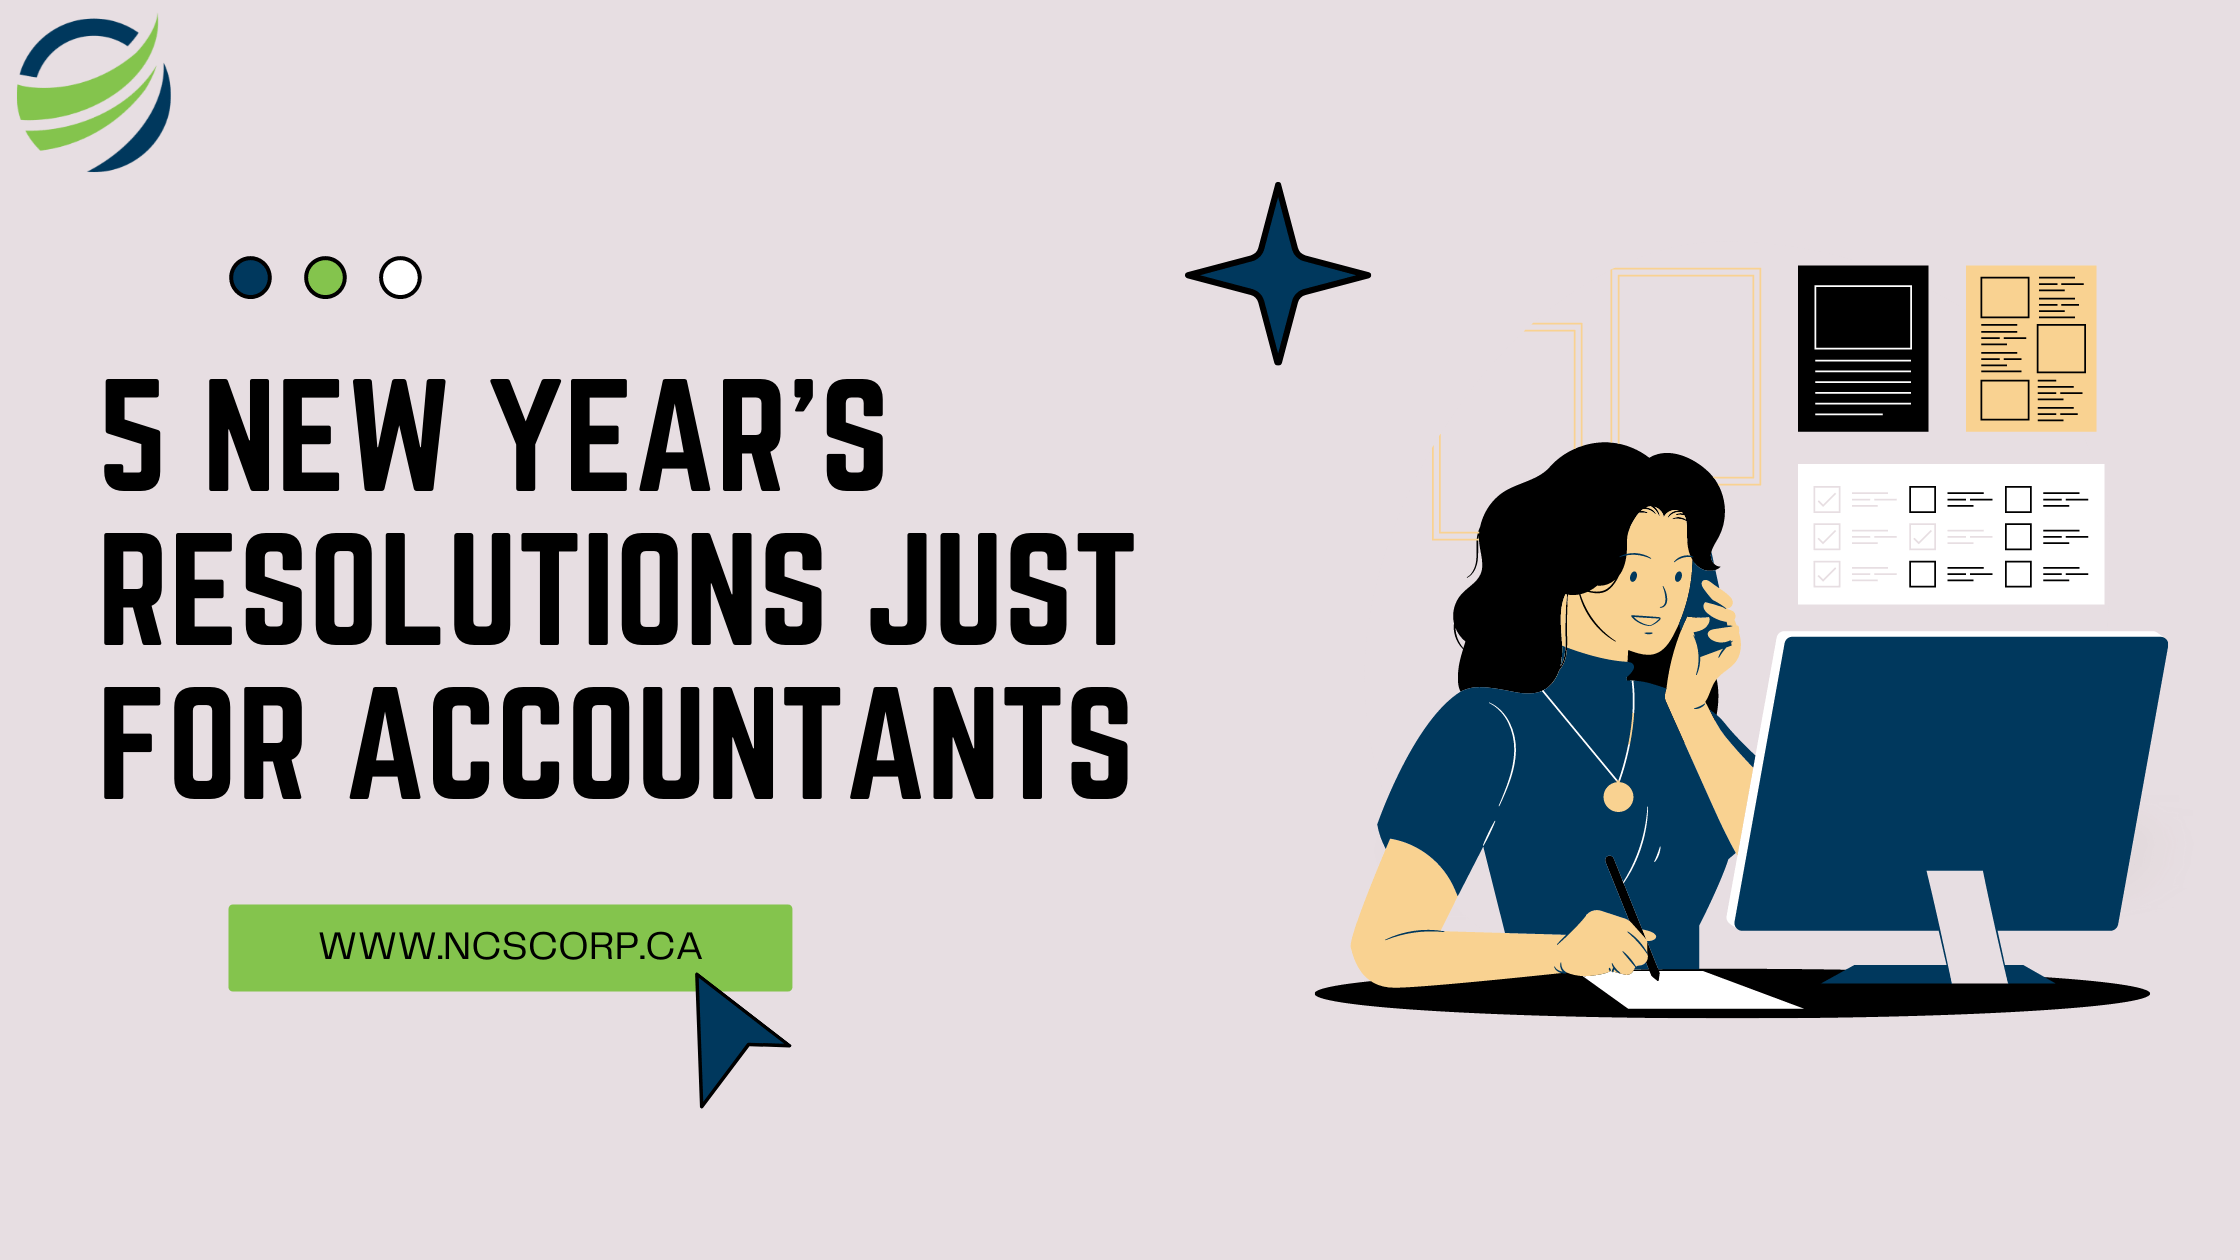 5 New Year’s Resolutions Just for Accountants